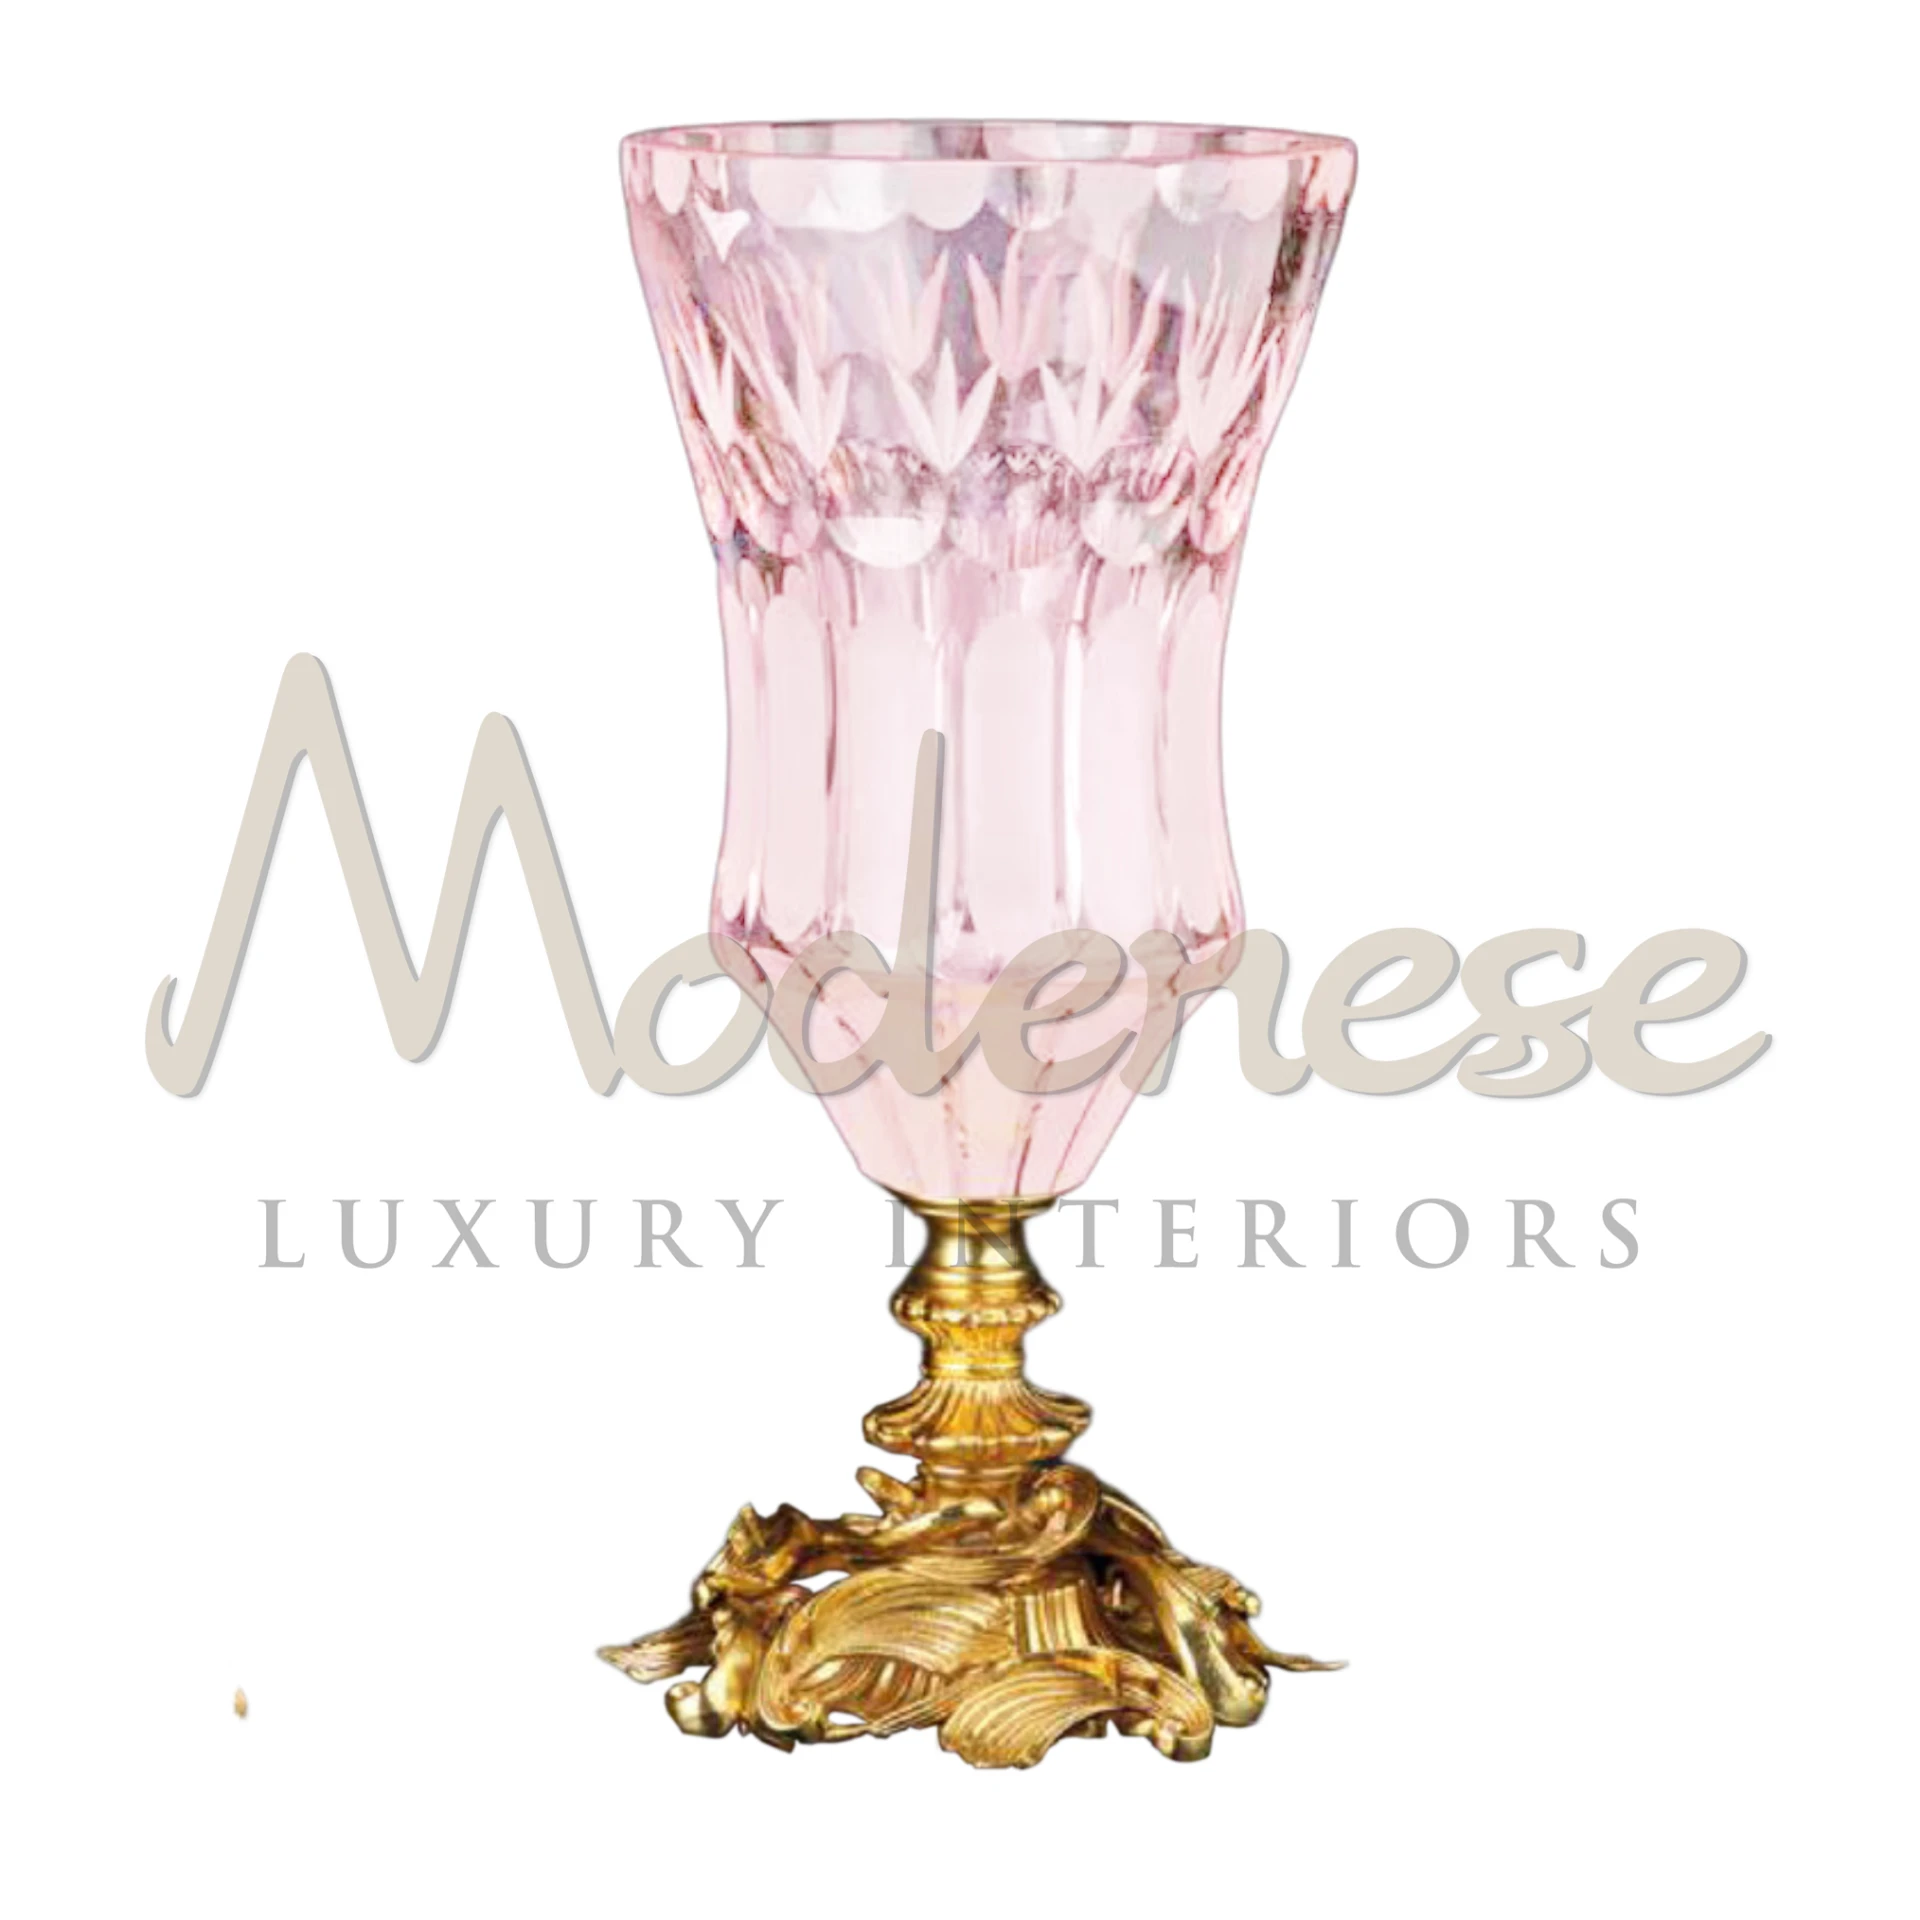 Classical Figured Pink Vase, featuring intricate patterns inspired by ancient Greek or Roman art, adds elegance and sophistication to luxury interiors.